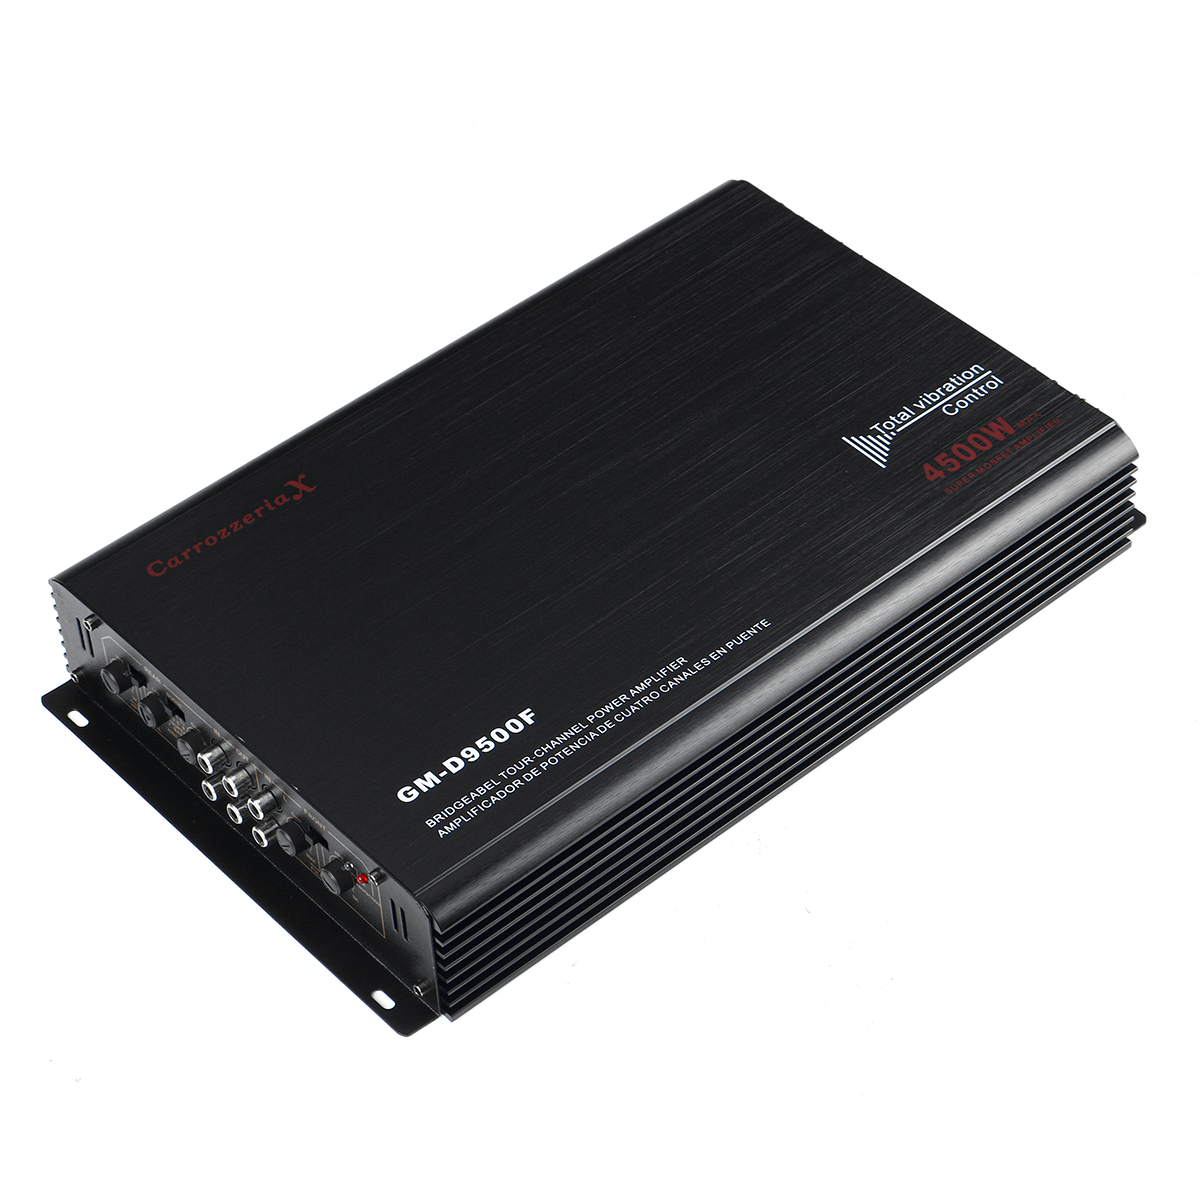 GM-D9500F 12V 4500W Car Audio Stereo Power Amplifier 4 Channel Class A/B 3D Stereo Surround Subwoofer